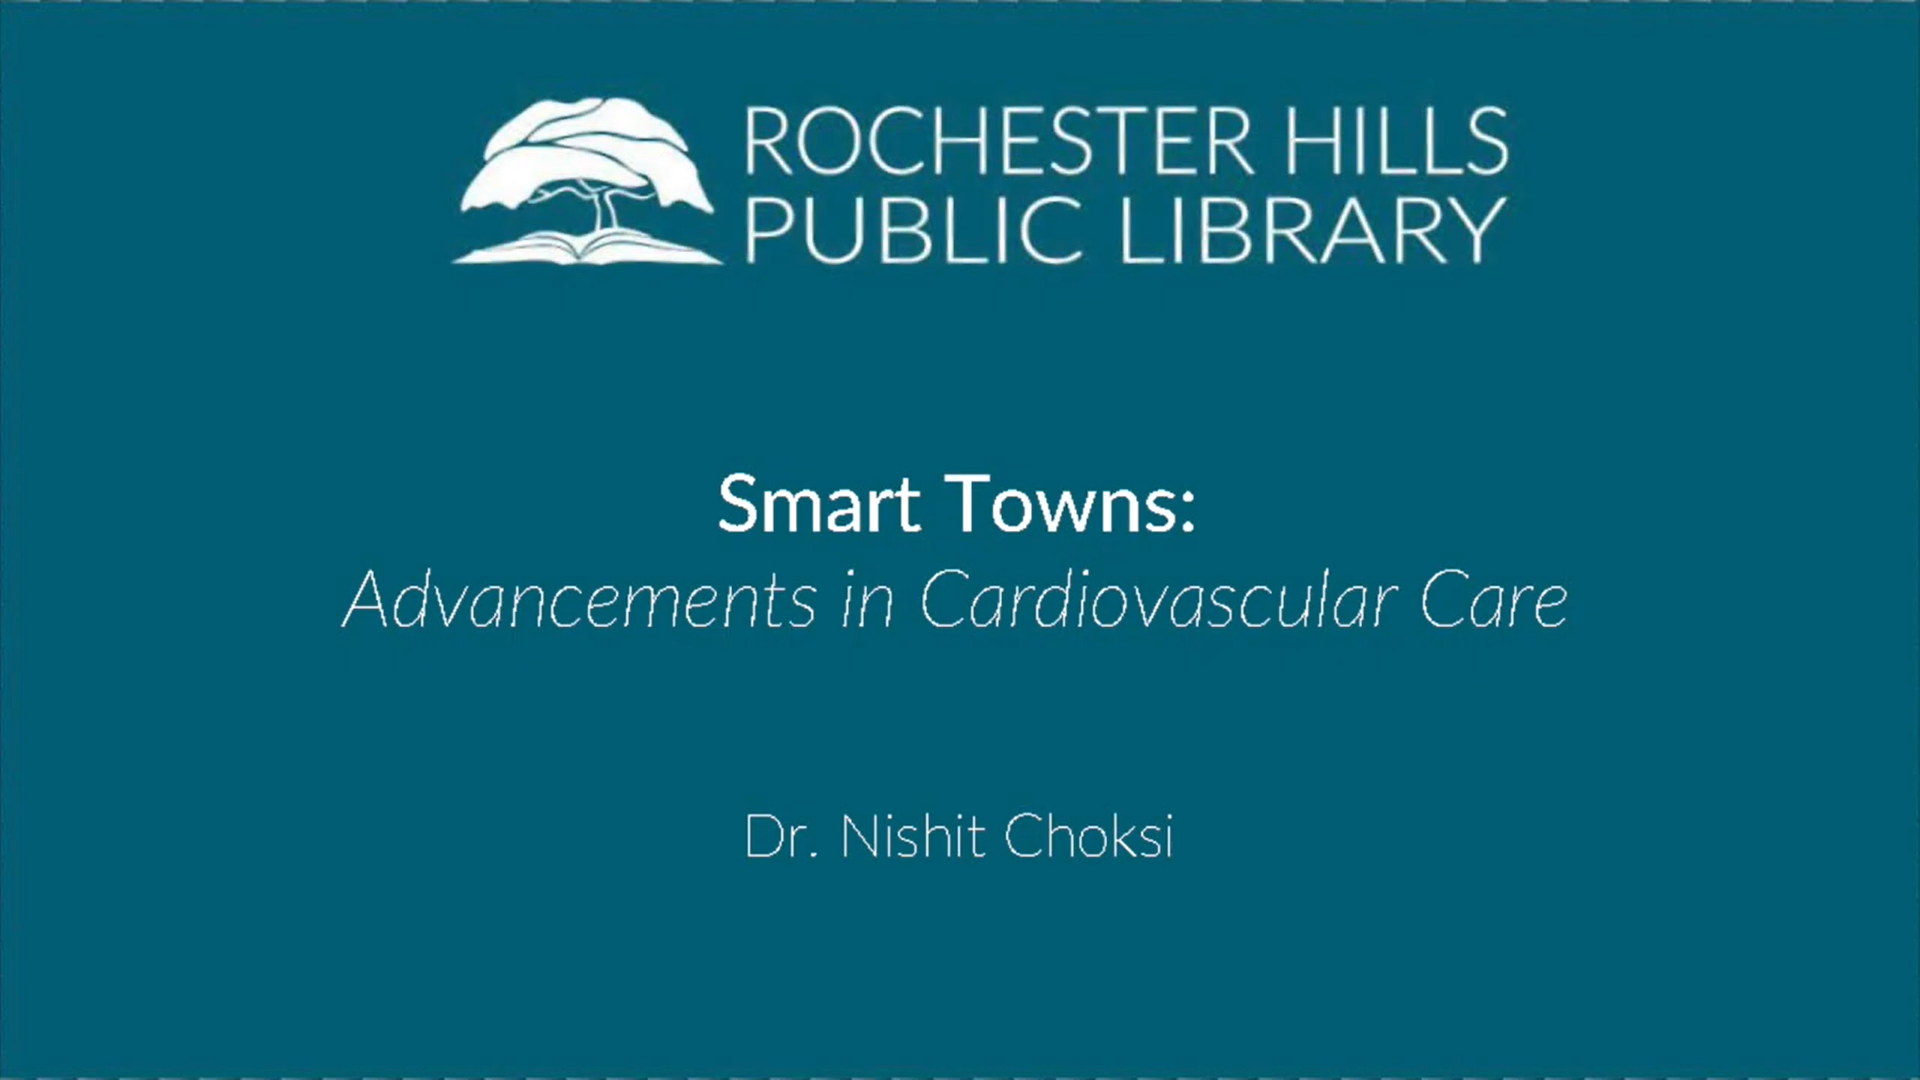 Smart Towns: Advancements in Cardiovascular Care